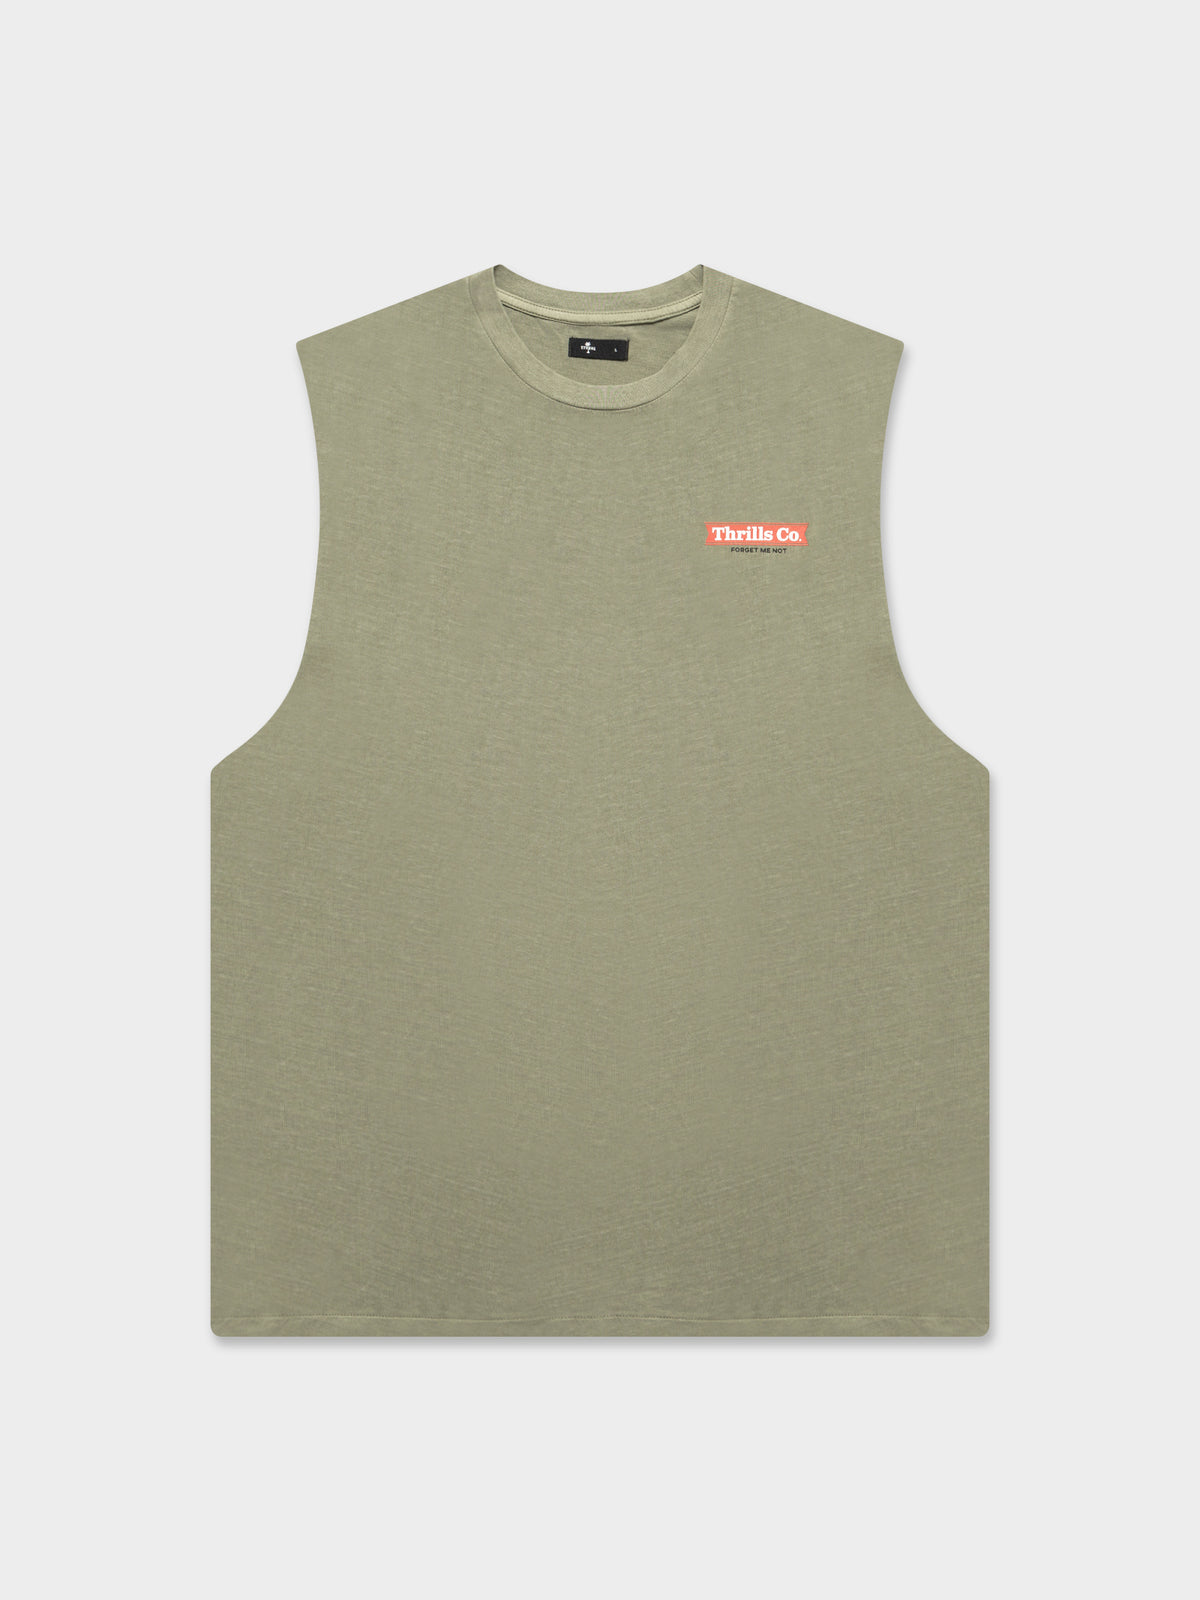 Brigade Merch Fit Muscle Shirt in Army Green